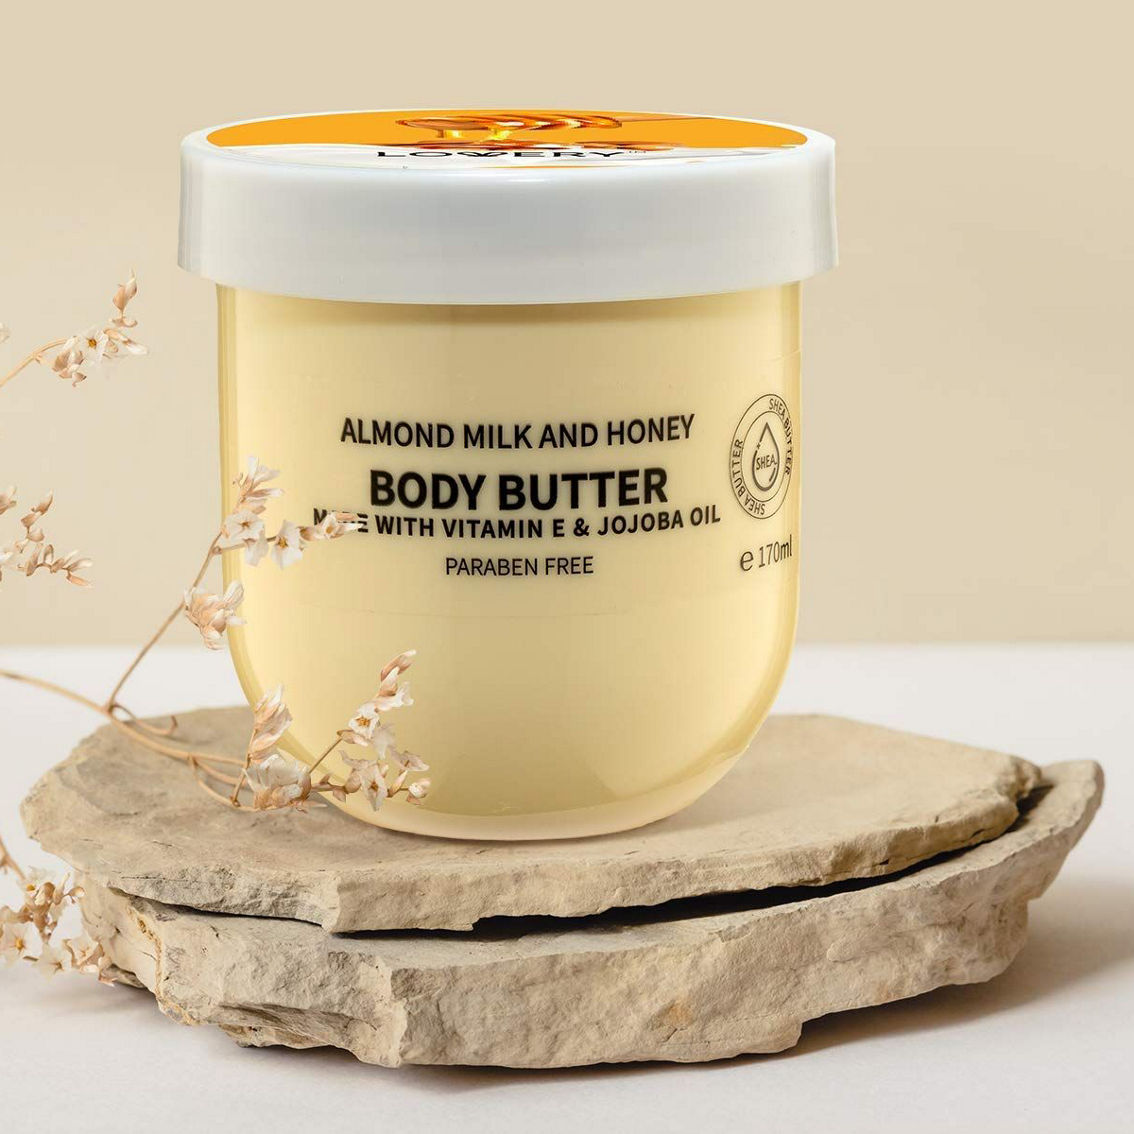 Lovery Almond Milk Whipped Body Butter 2 Piece - Image 3 of 4